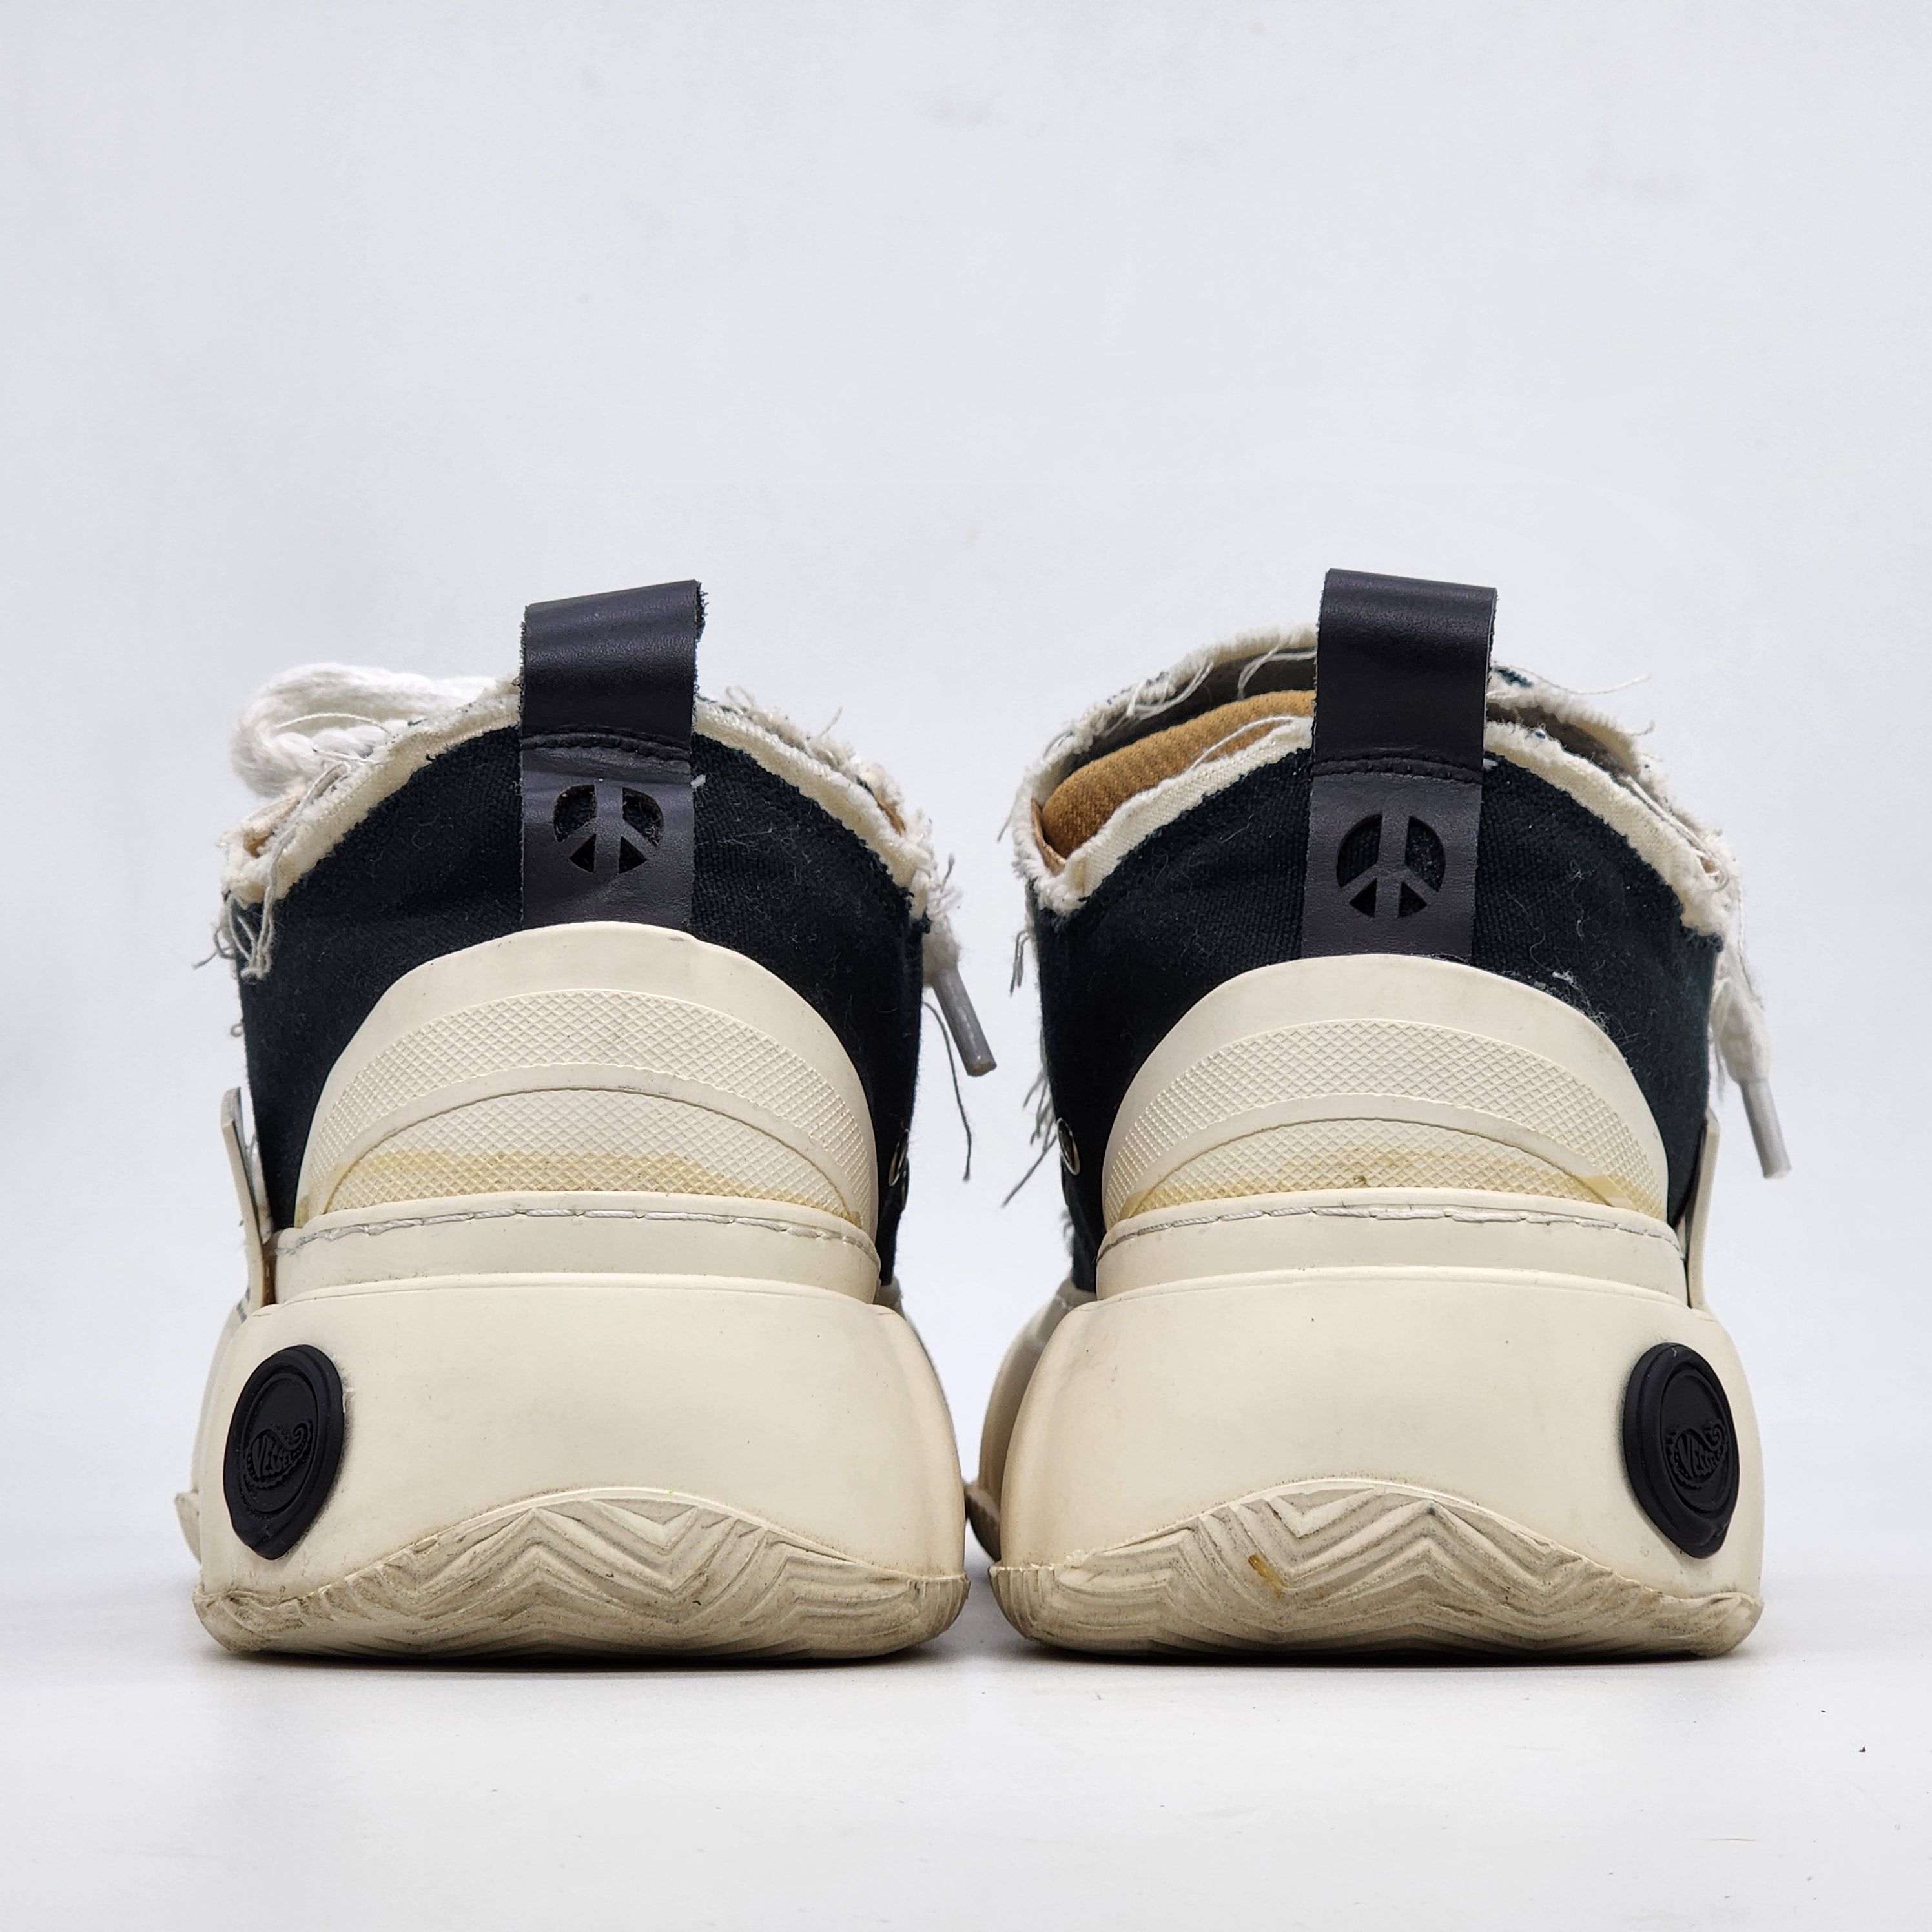 XVESSEL - G.O.P. 2.0 MARSHMALLOW LOWS BLACK - 7